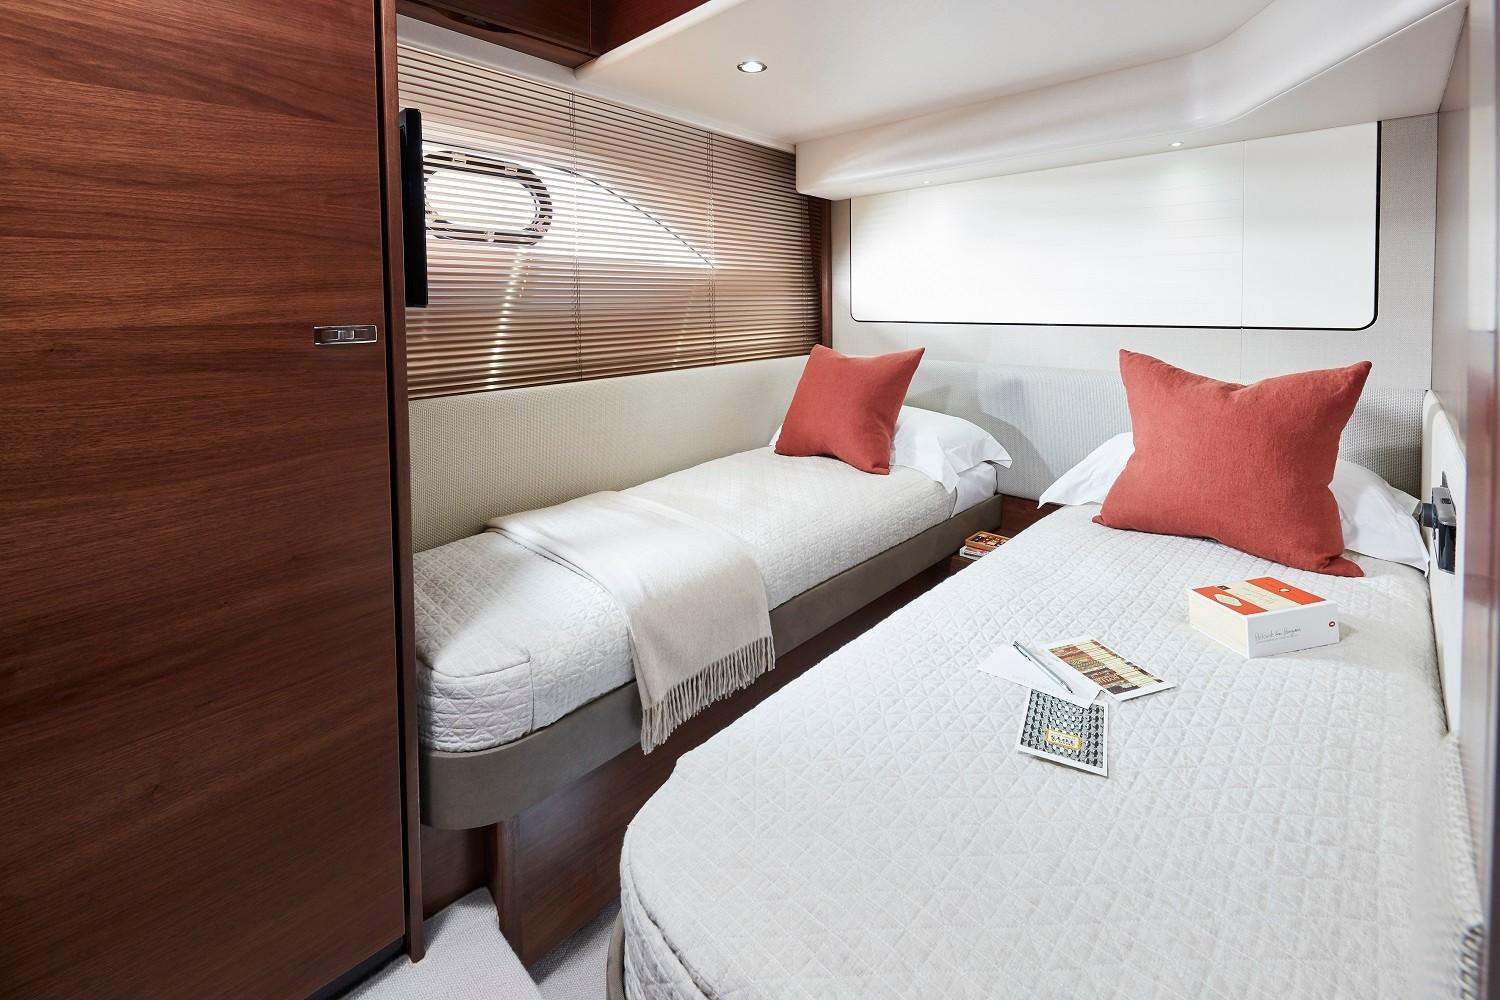  Yacht Photos Pics Manufacturer Provided Image: Princess 62 Twin Cabin